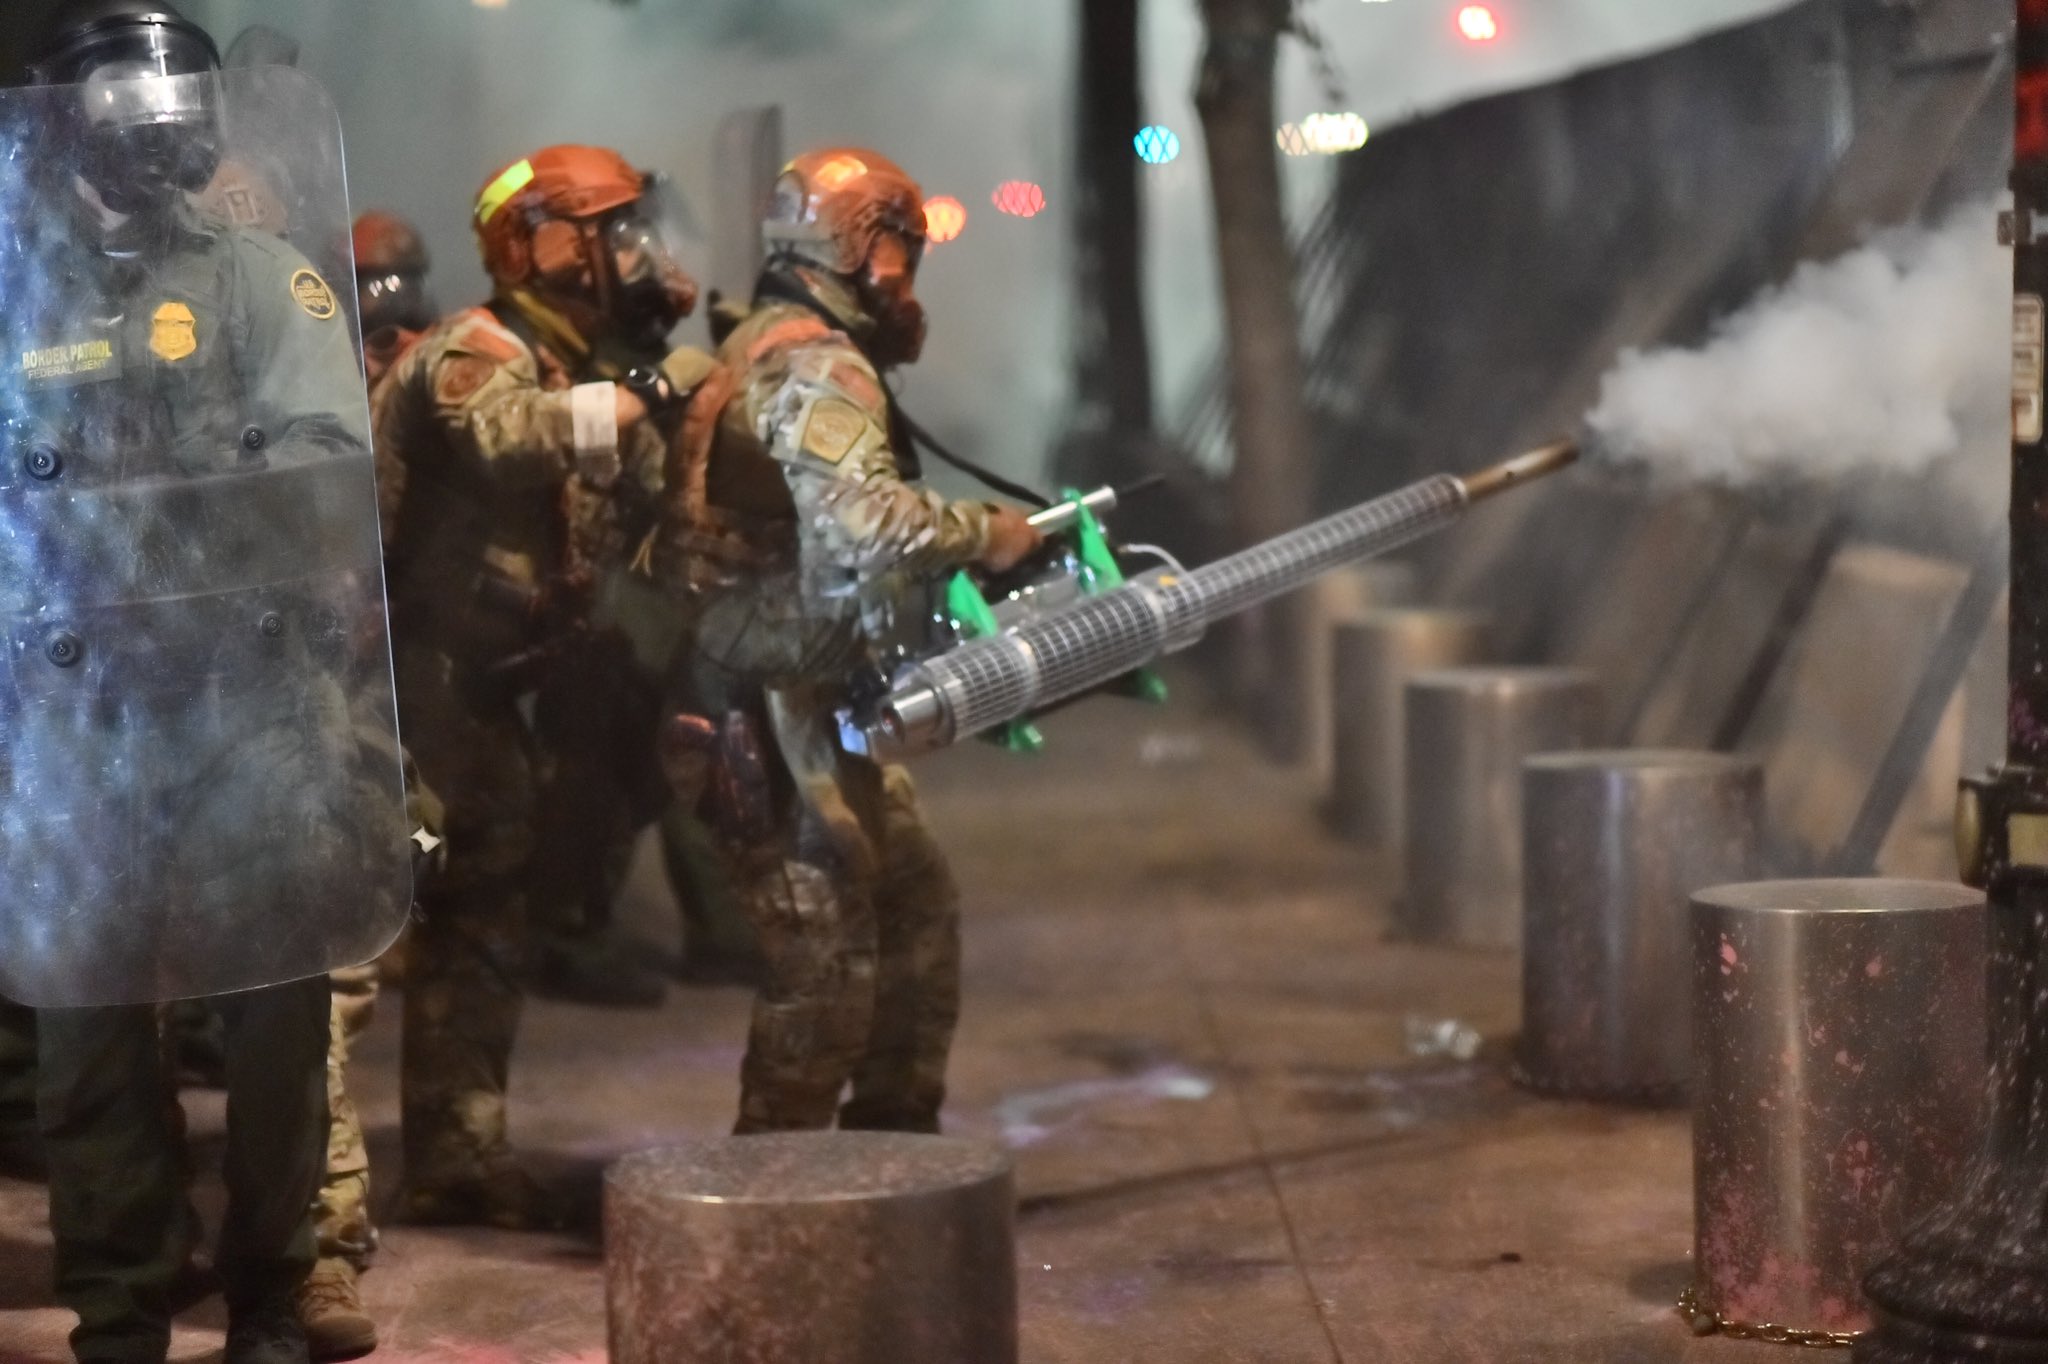 Fully riot-geared and for some reason in green camo US Homeland Security agents (to the middle and the left of the photo) behind a row of two-foot tall, one-foot radius metal posts, behind a metal grate wall over 7 feet tall with metal support beams and concrete pylon buttressing. In the front of the left side is an agent holding a plastic clear riot shield, through which you can see a patch that say 'Border Patrol Federal Agent' in yellow and some insignia patches as well. In the middle are the agents in camo, one with a hand on the shoulder of another who is operating a thermal fogger machine shooting gas through the fence. The machine is maybe four or five feet long and has a body not unlike a bush whacker with a two-cycle engine, but fueling a vaporizer instead of a rotor. The agent is holding the machine with their right hand visibly and there is a black strap across their shoulder holding it up. The machine is mostly shiny metal, although the tip is showing signs of corrosion (no surprise based on the compounds and heat) and the supports of the body are a bright green.